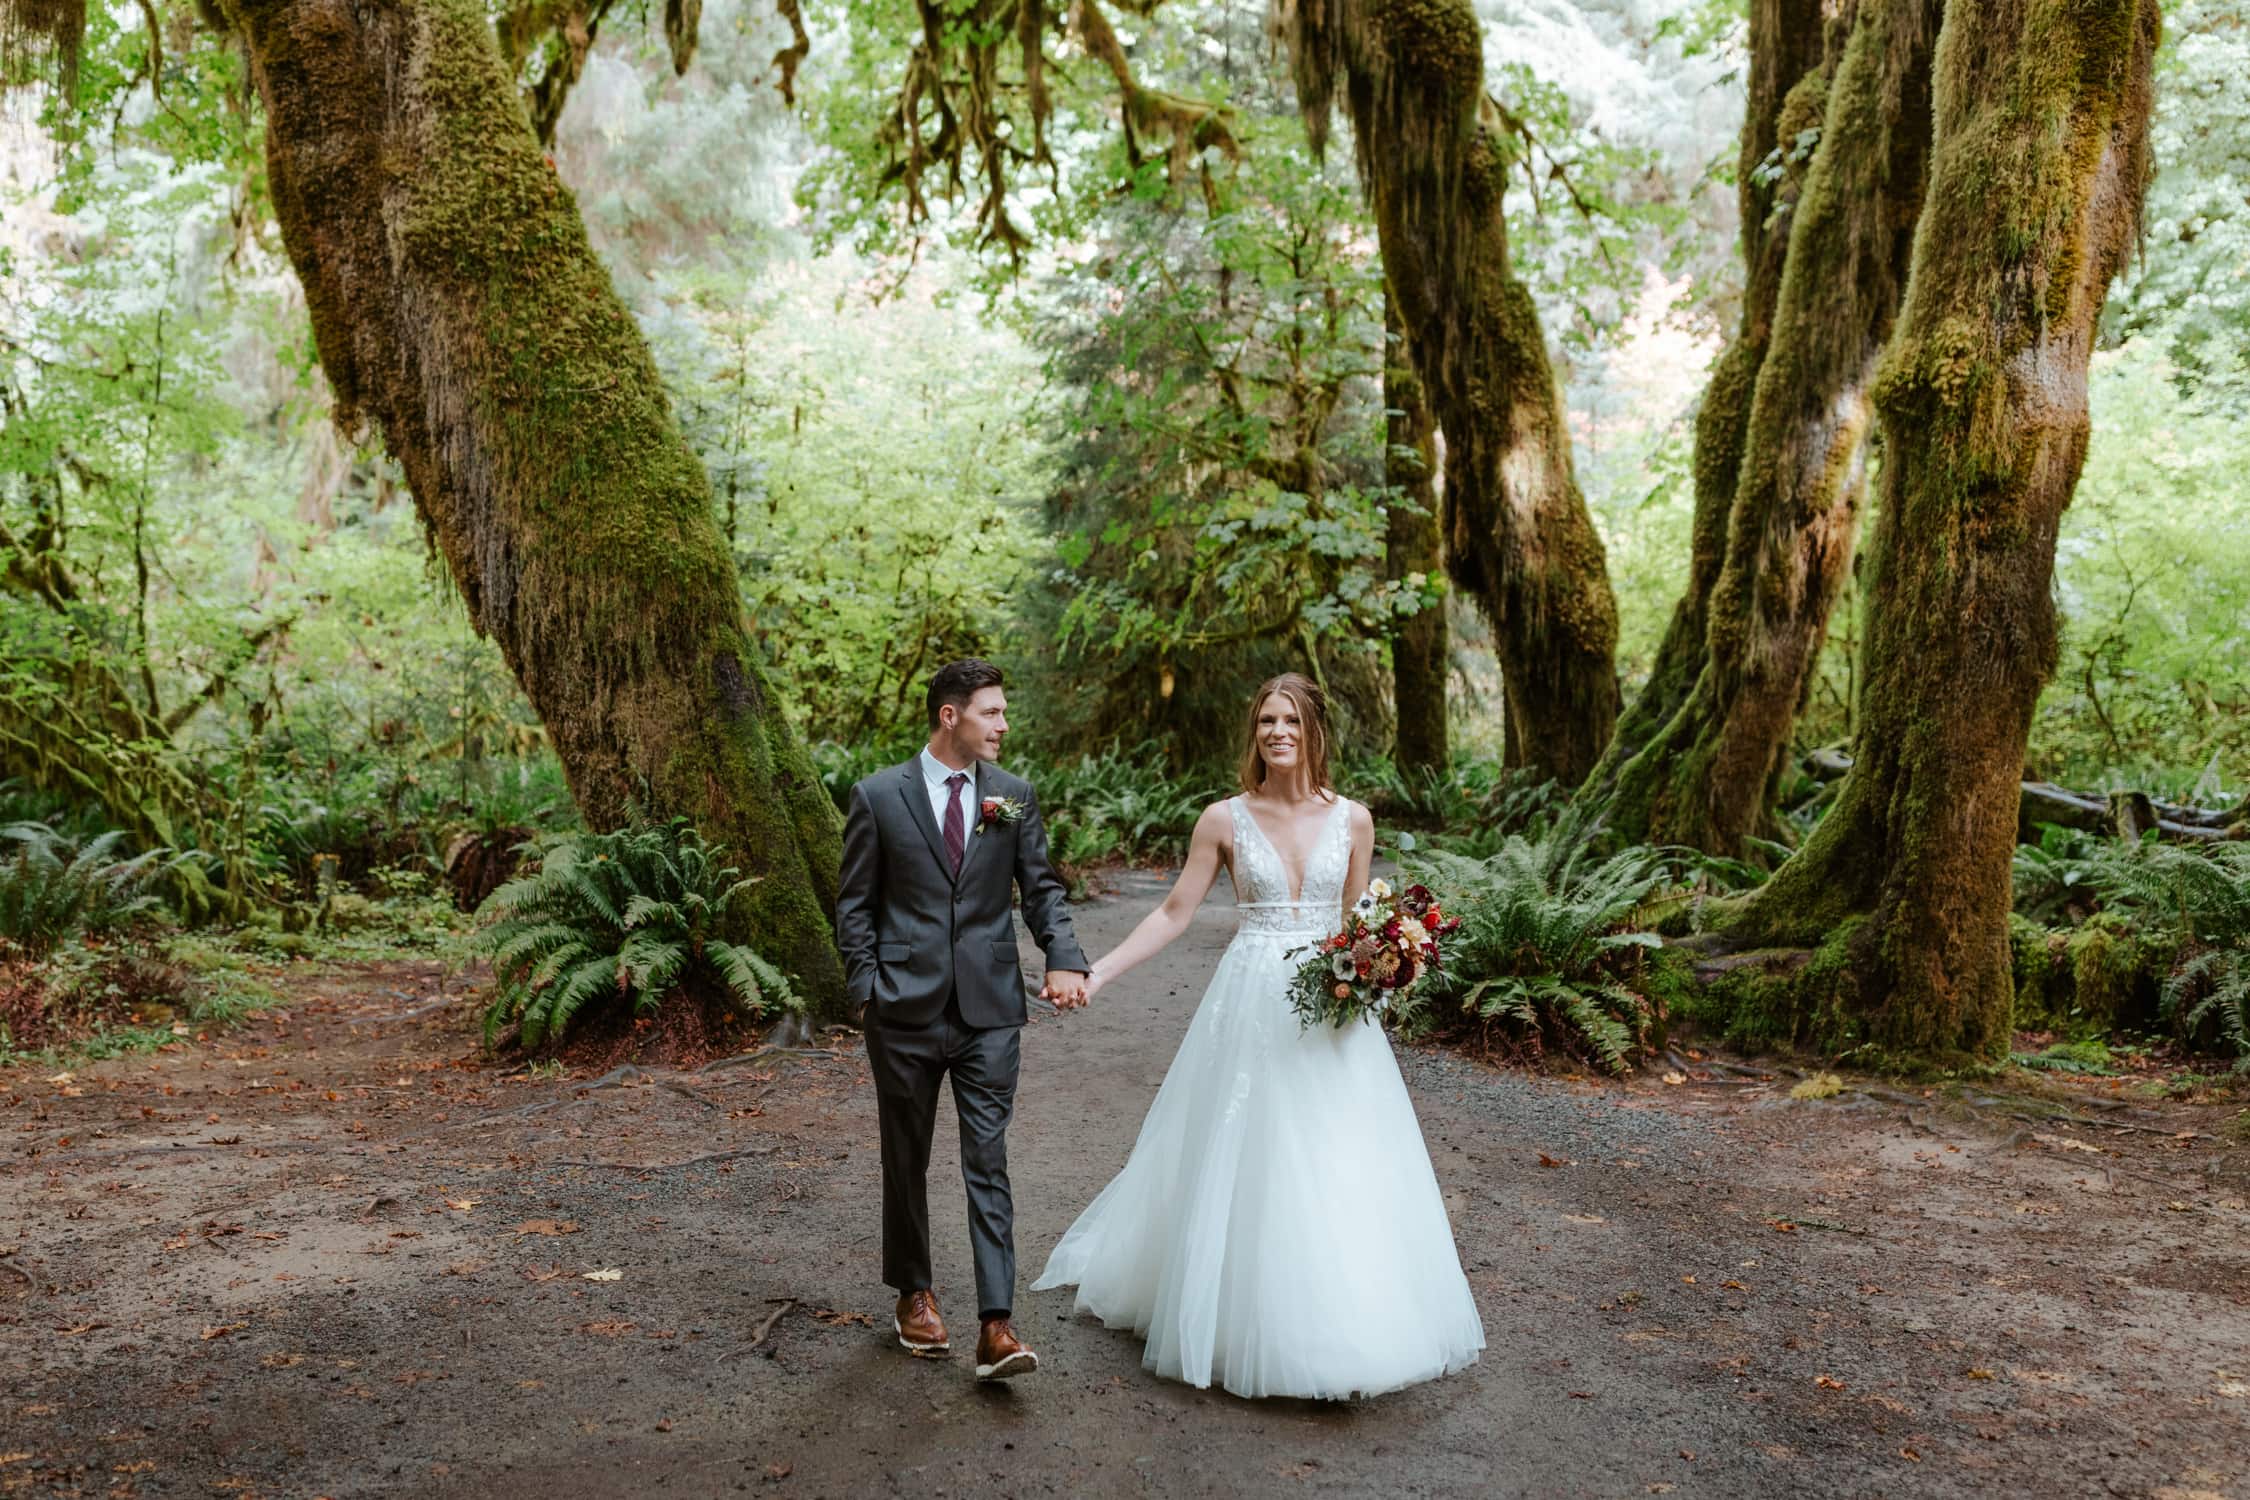 A couple in wedding attire holding hands and walking towards the camera in the Hoh Rainforest.